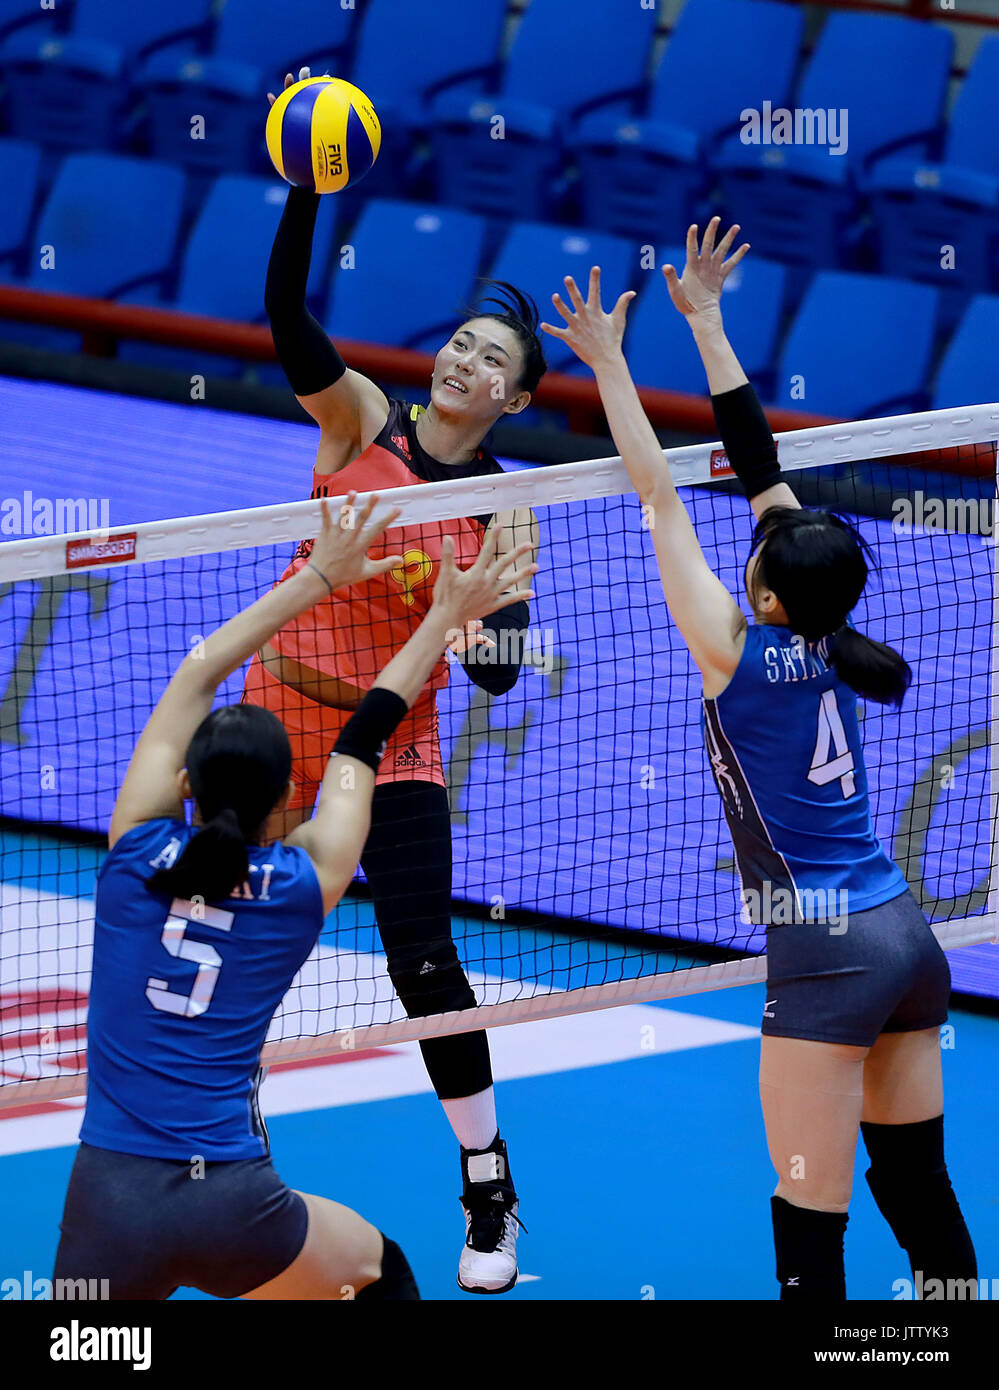 Laguna Province, Philippines. 10th Aug, 2017. Jin Ye of China (C) competes against Erika Araki (L) and Risa Shinnabe of Japan during their preliminary round match in the 2017 Asian Women's Volleyball Championship in Laguna Province, the Philippines, Aug. 10, 2017. Japan won 3-0. Credit: Rouelle Umali/Xinhua/Alamy Live News Stock Photo